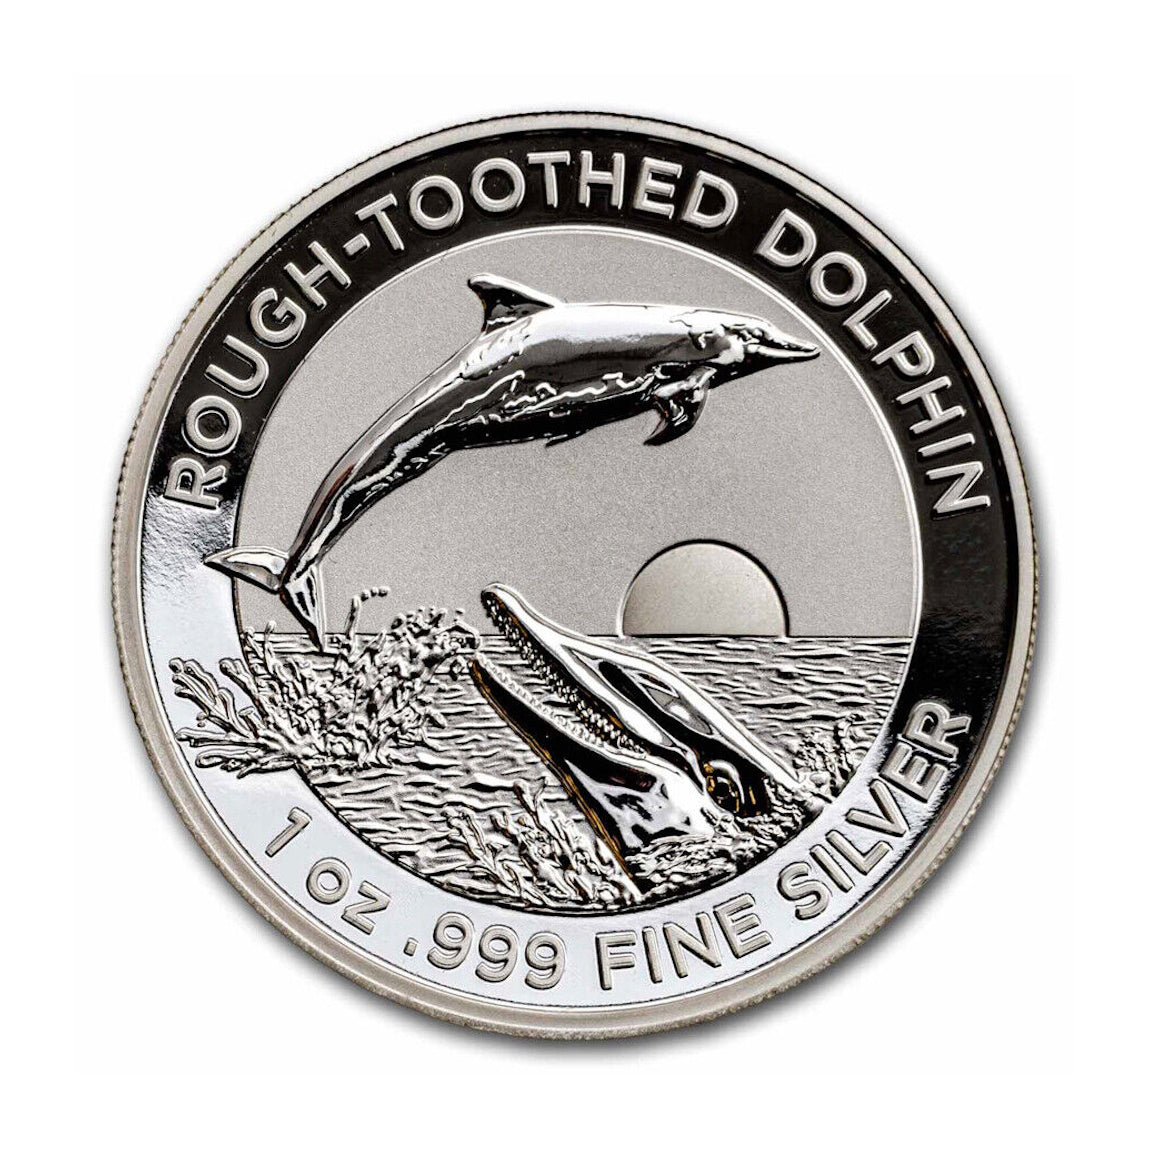 2023 Rough Toothed Dolphin $5 High Relief 1oz Silver Coin - PreOrder